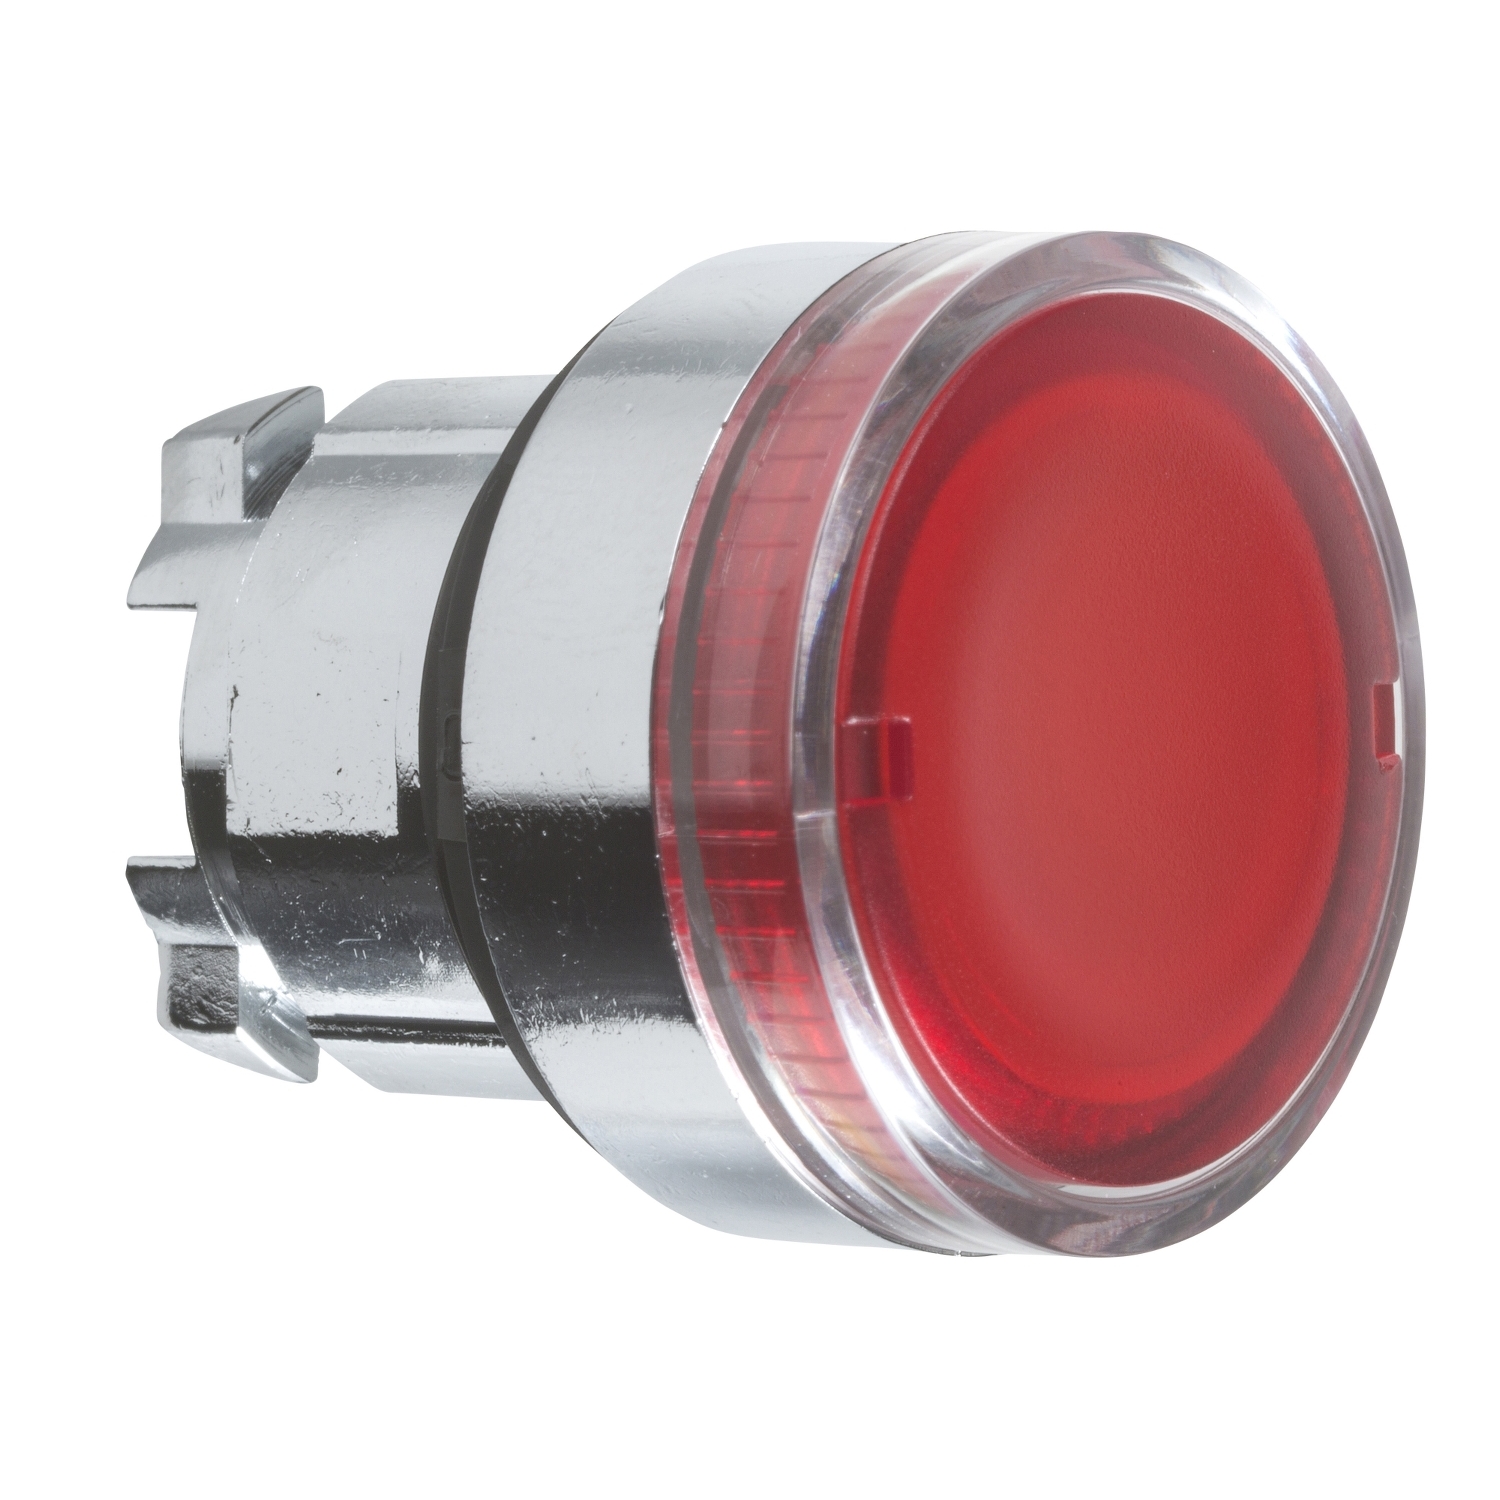 ZB4BW34 Red light button head ø 22 for BA9s lamp